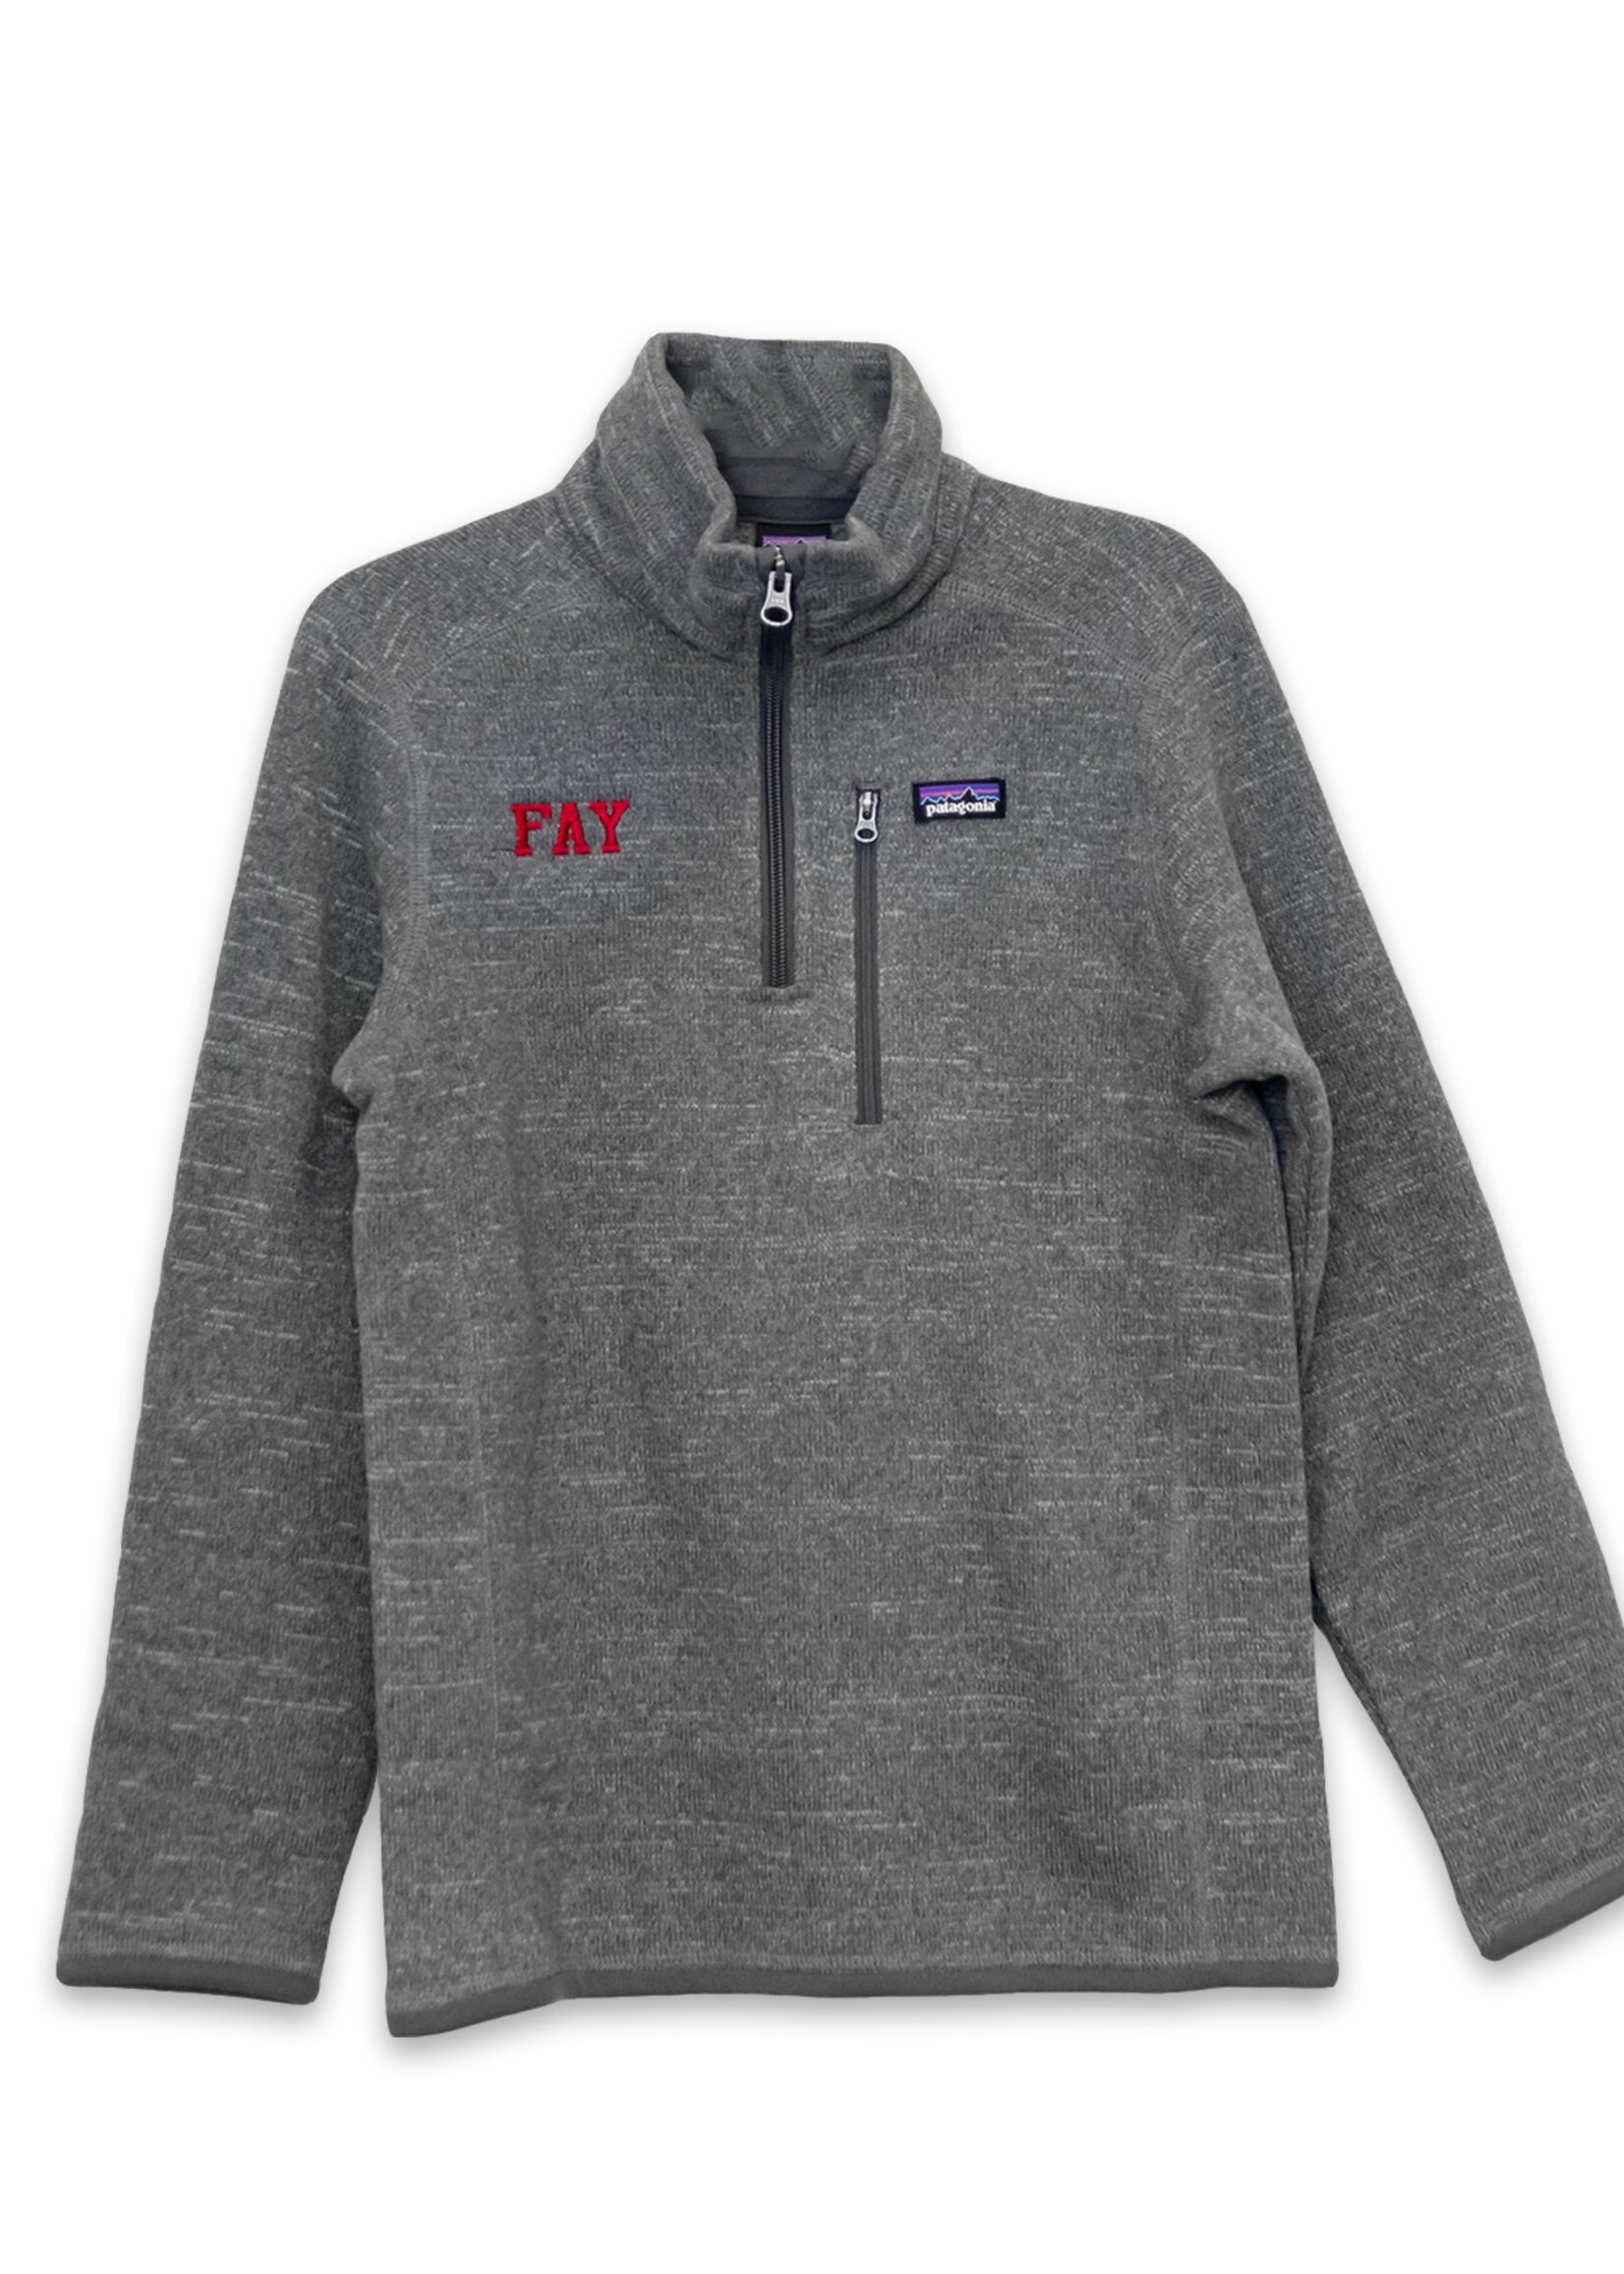 Patagonia Pullover Youth Sweater 1/4 zip